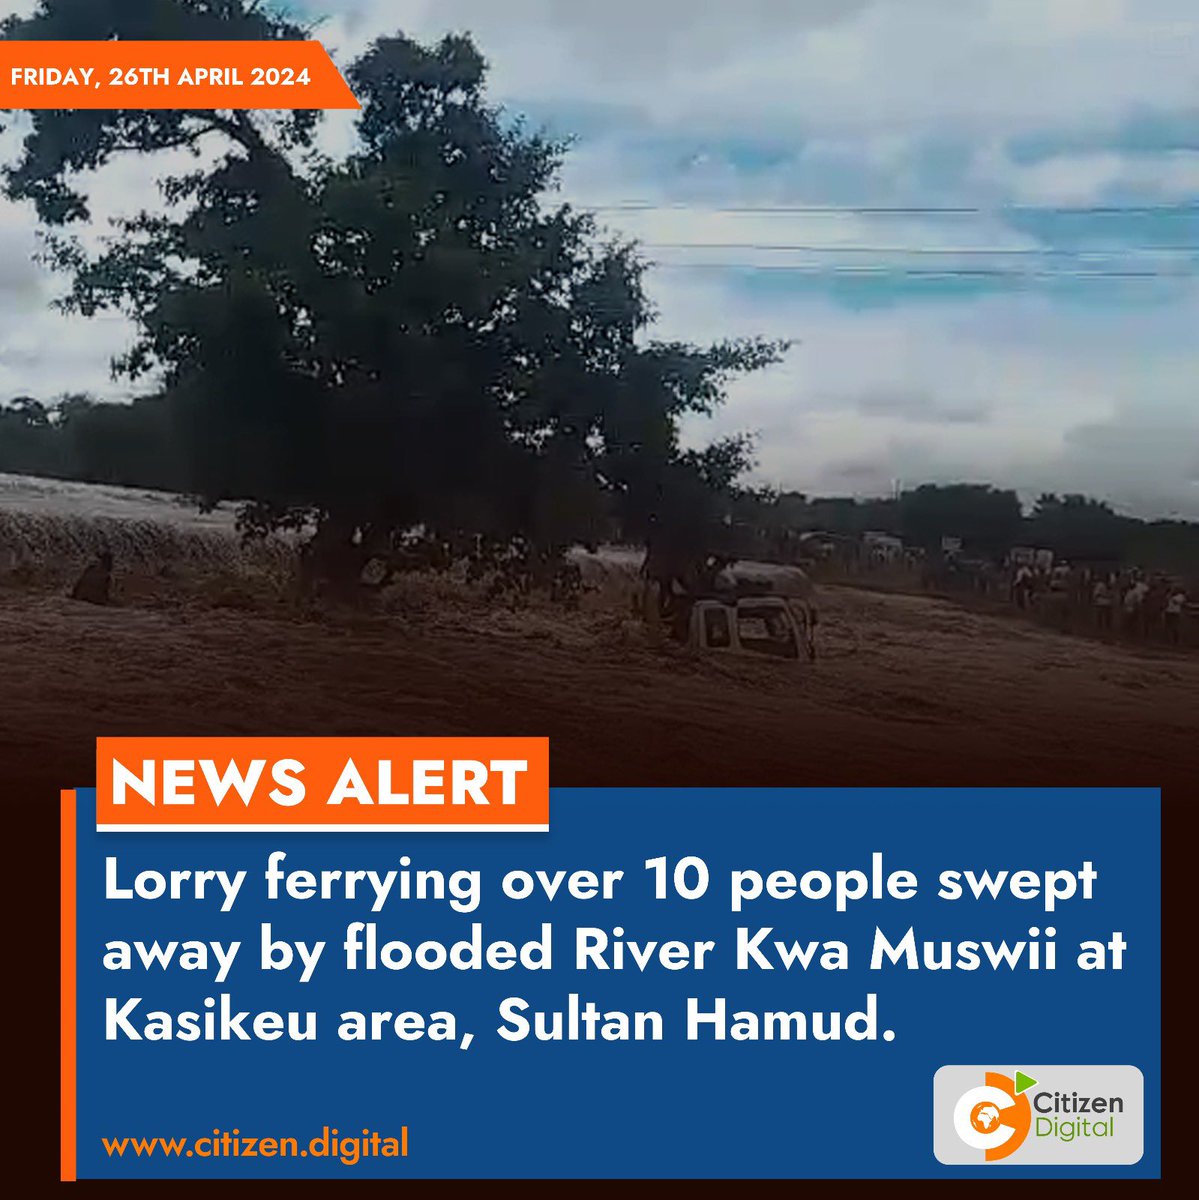 Lorry ferrying over 10 people swept away by flooded River Kwa Muswii at Kasikeu area, Sultan Hamud